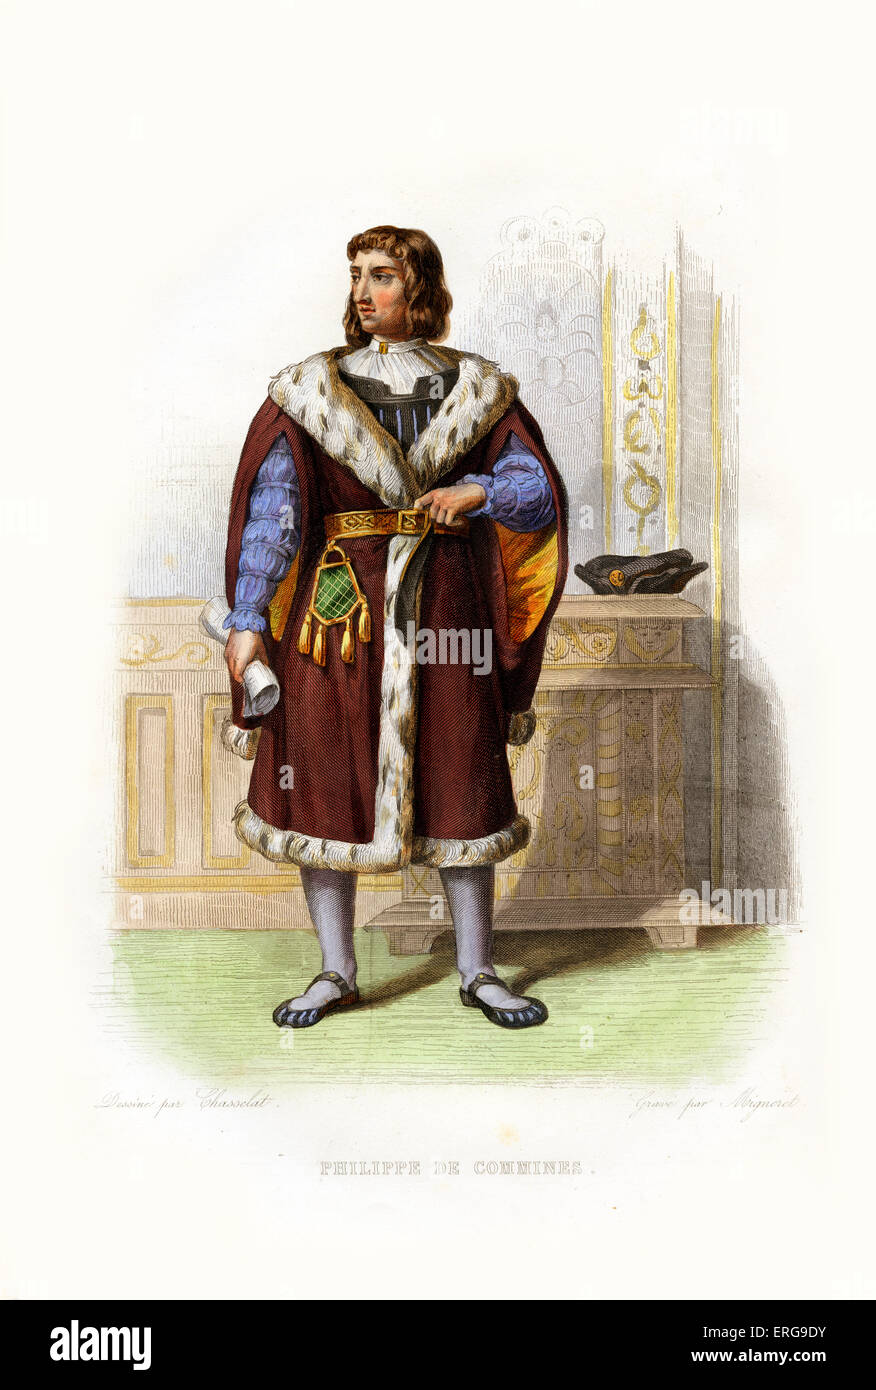 Philippe de Commines. Writer and diplomat in the courts of Burgundy and France. 1445 – c. 1509. Engraving by Migneret, c.1846 Stock Photo